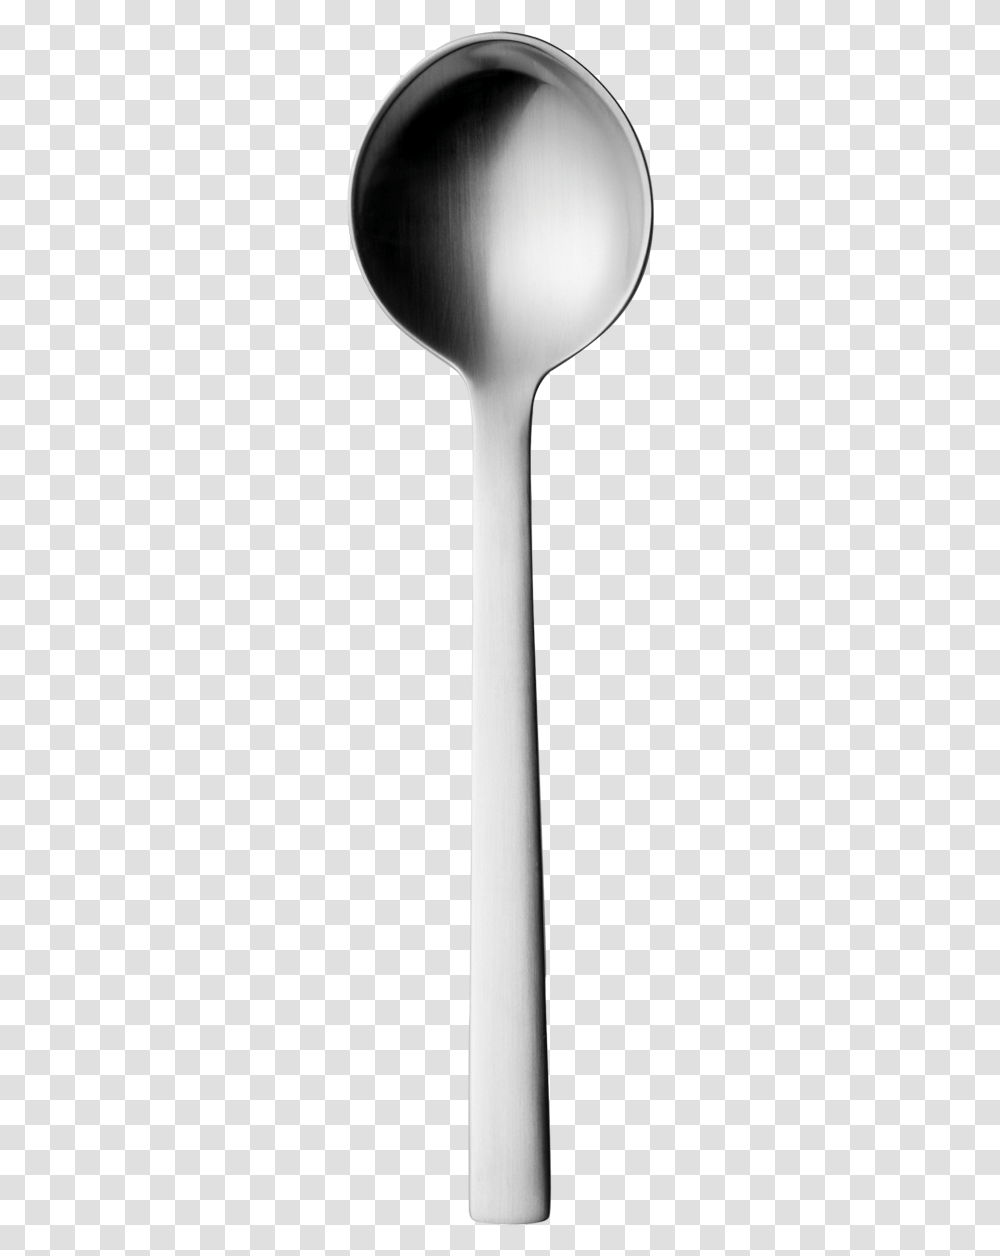 New York Dessert Spoon Background Spoon, Cutlery, Architecture, Building, Pillar Transparent Png